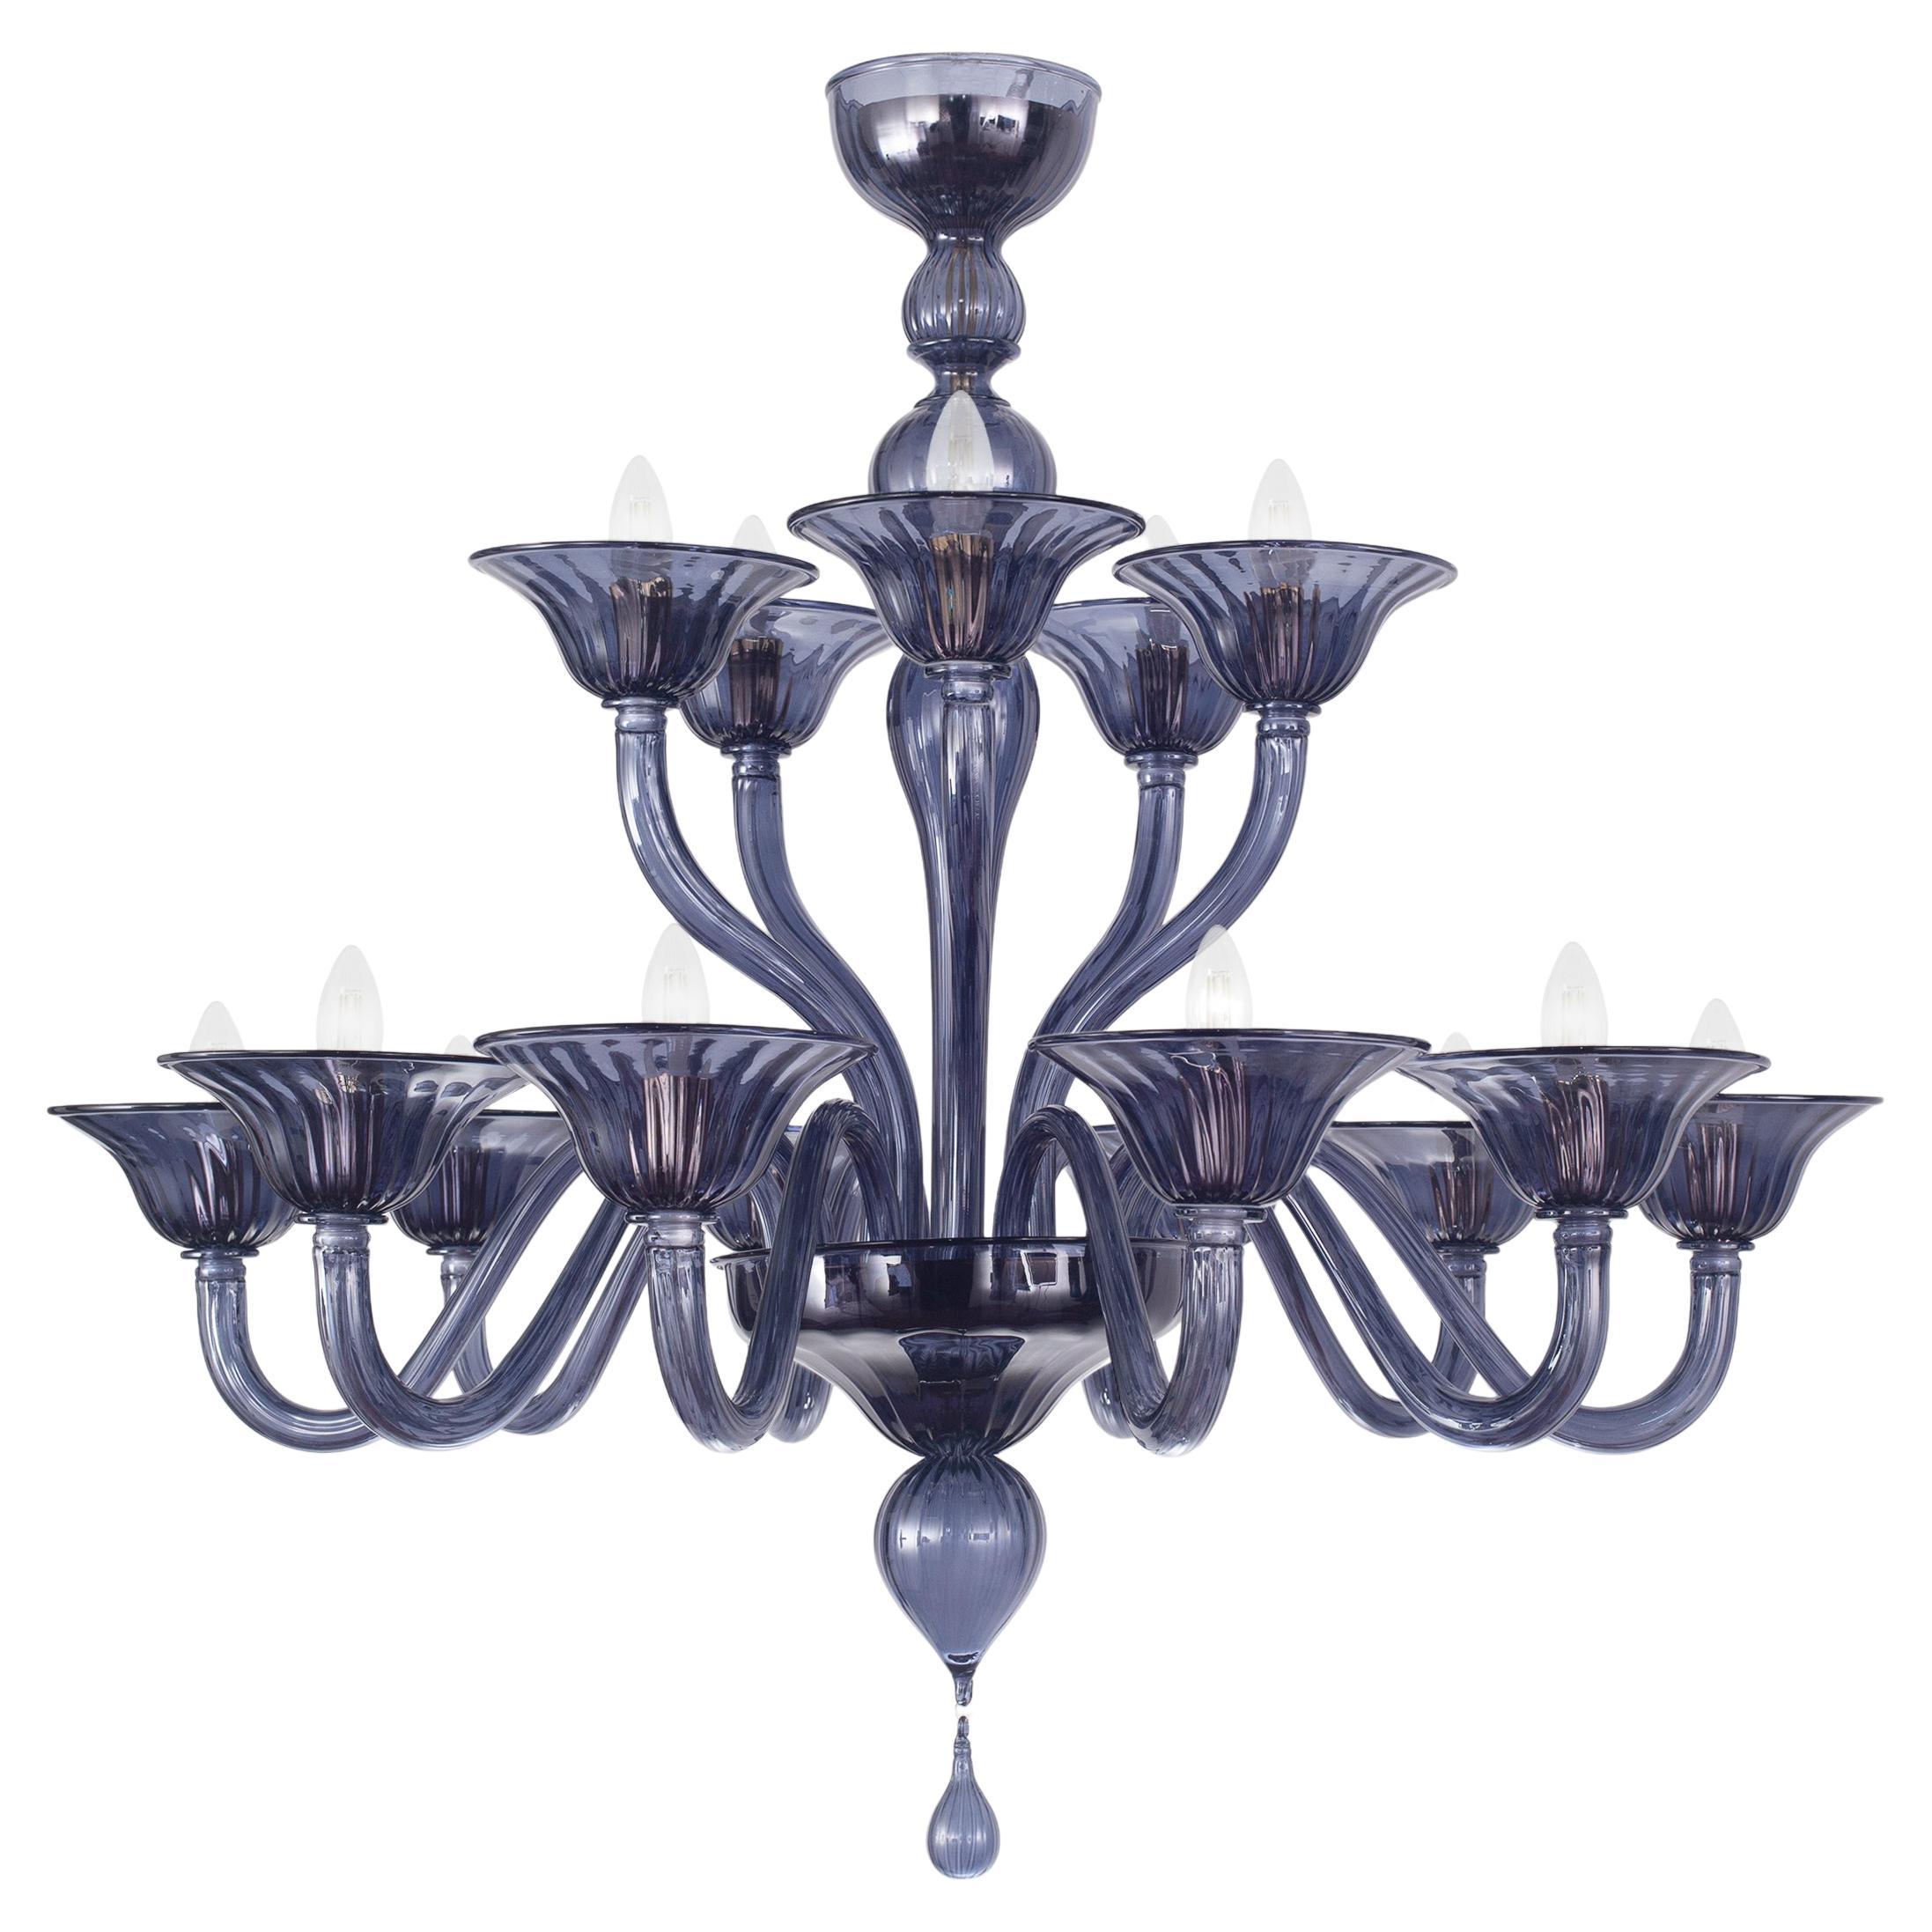 15 Arms Chandelier Slate Blue Artistic Murano Glass Simplicissimus by Multiforme For Sale